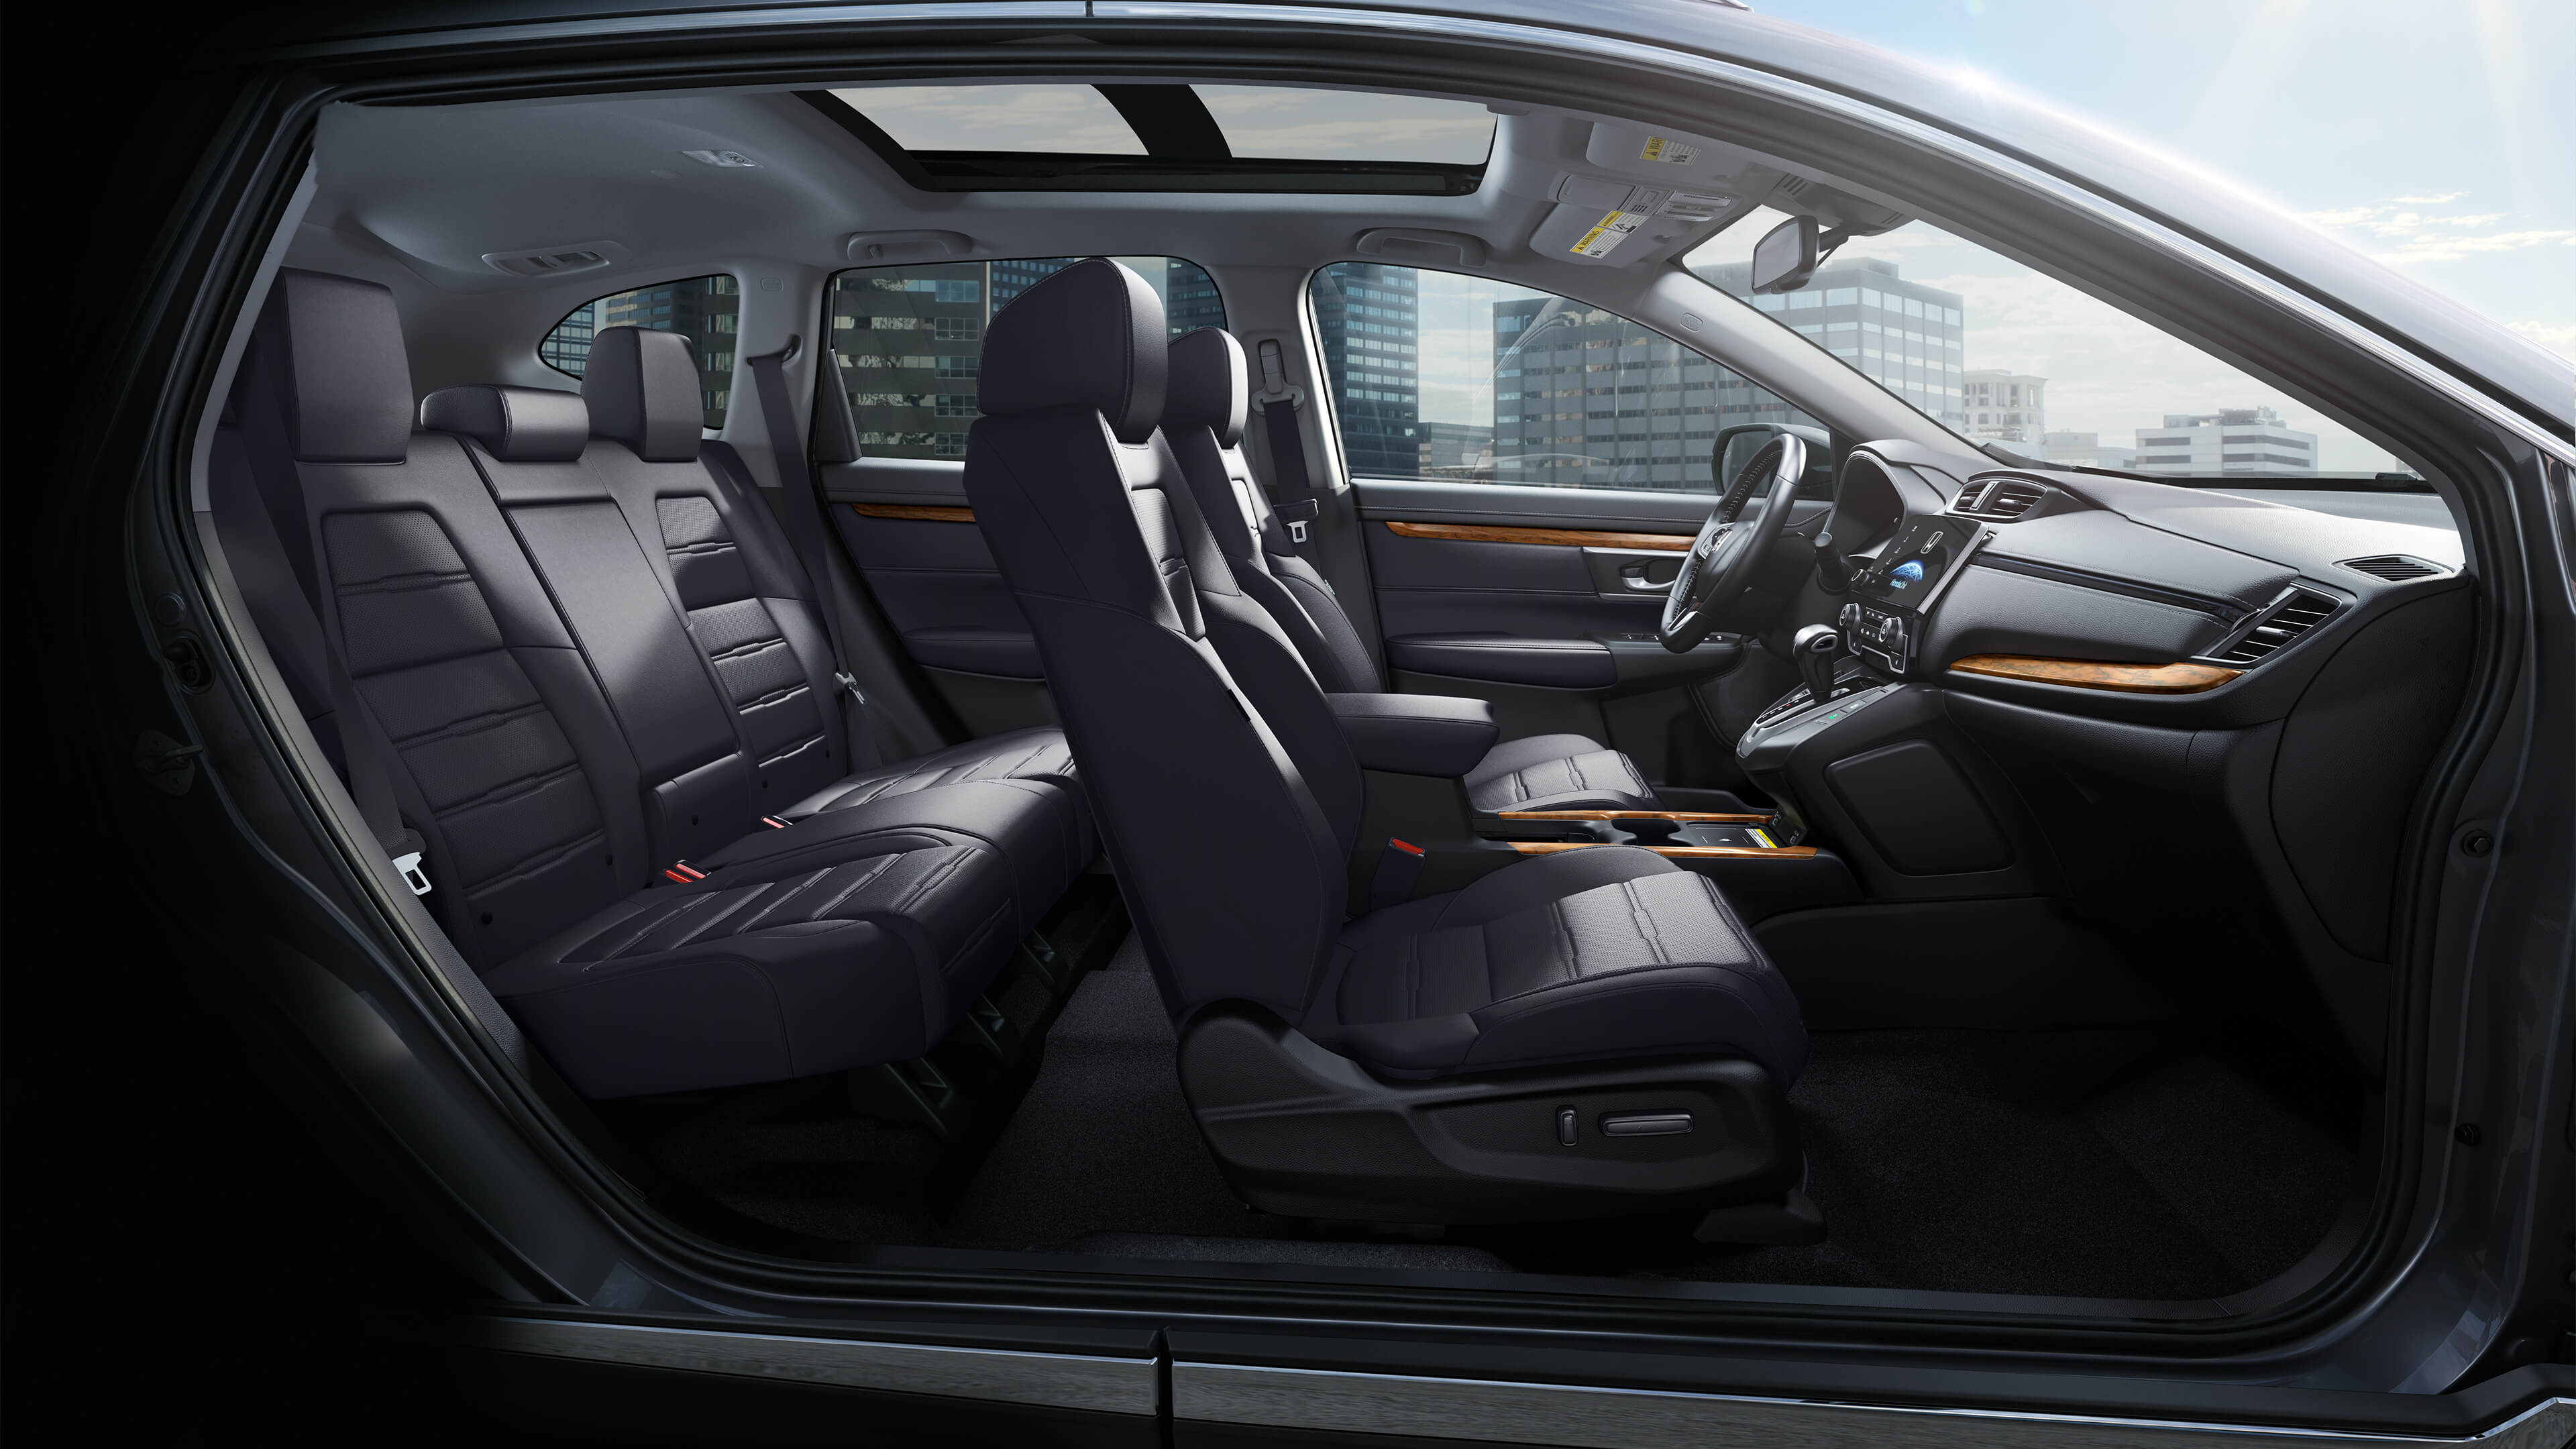 Interior passenger-side view of the 2021 Honda CR-V with leather-trimmed seats.